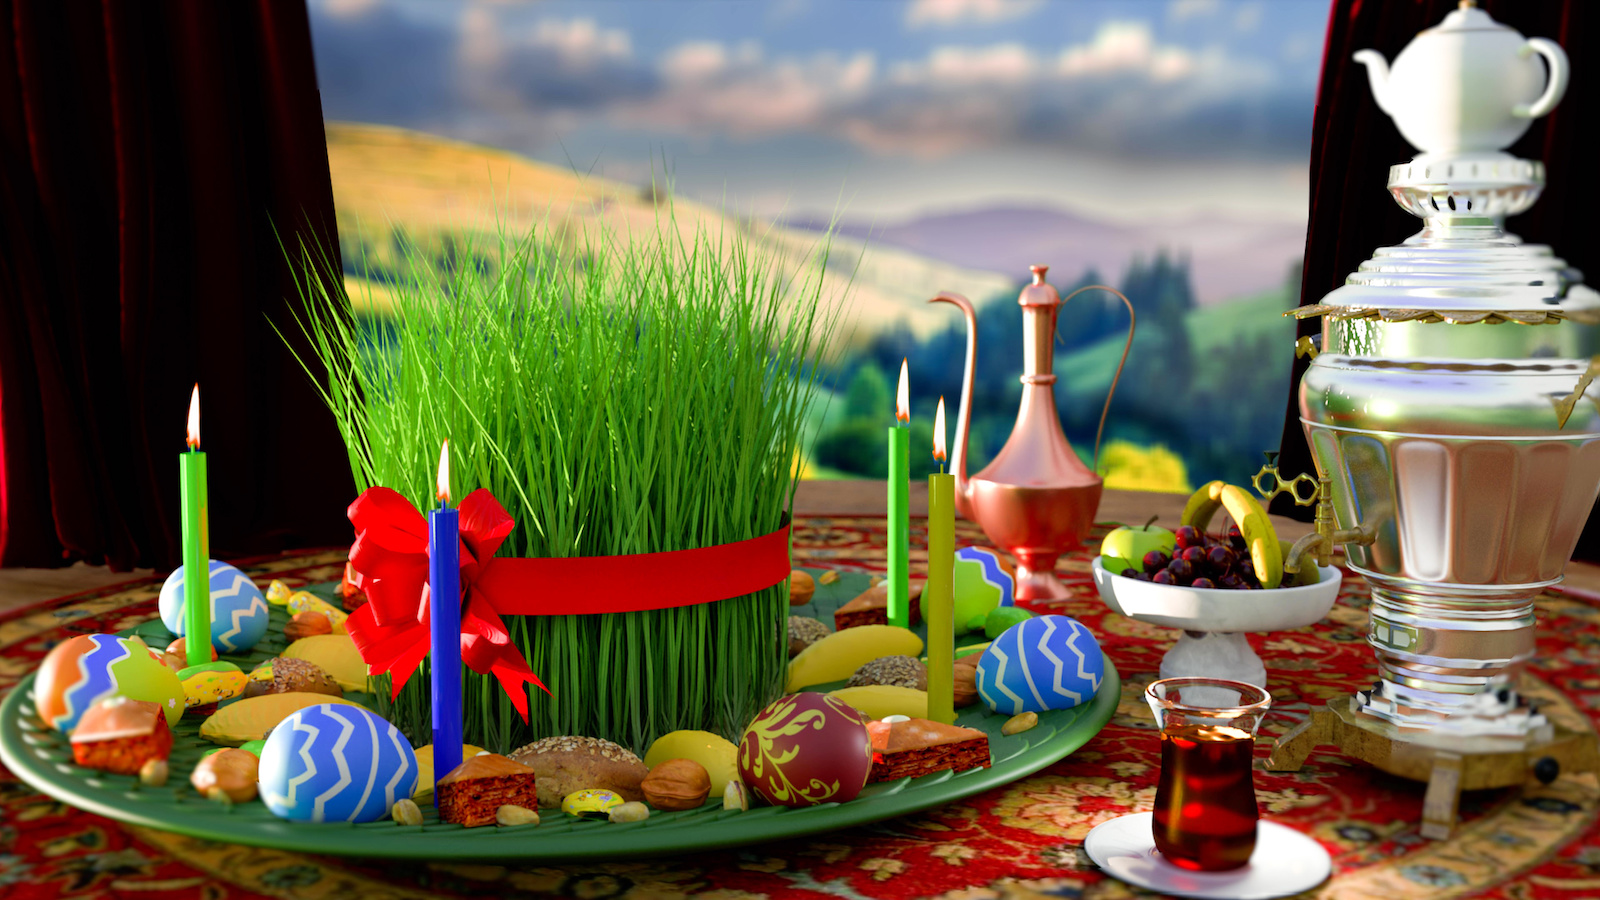 platter with colored eggs, slender candles, green wheatgrass and ornate tea kettle